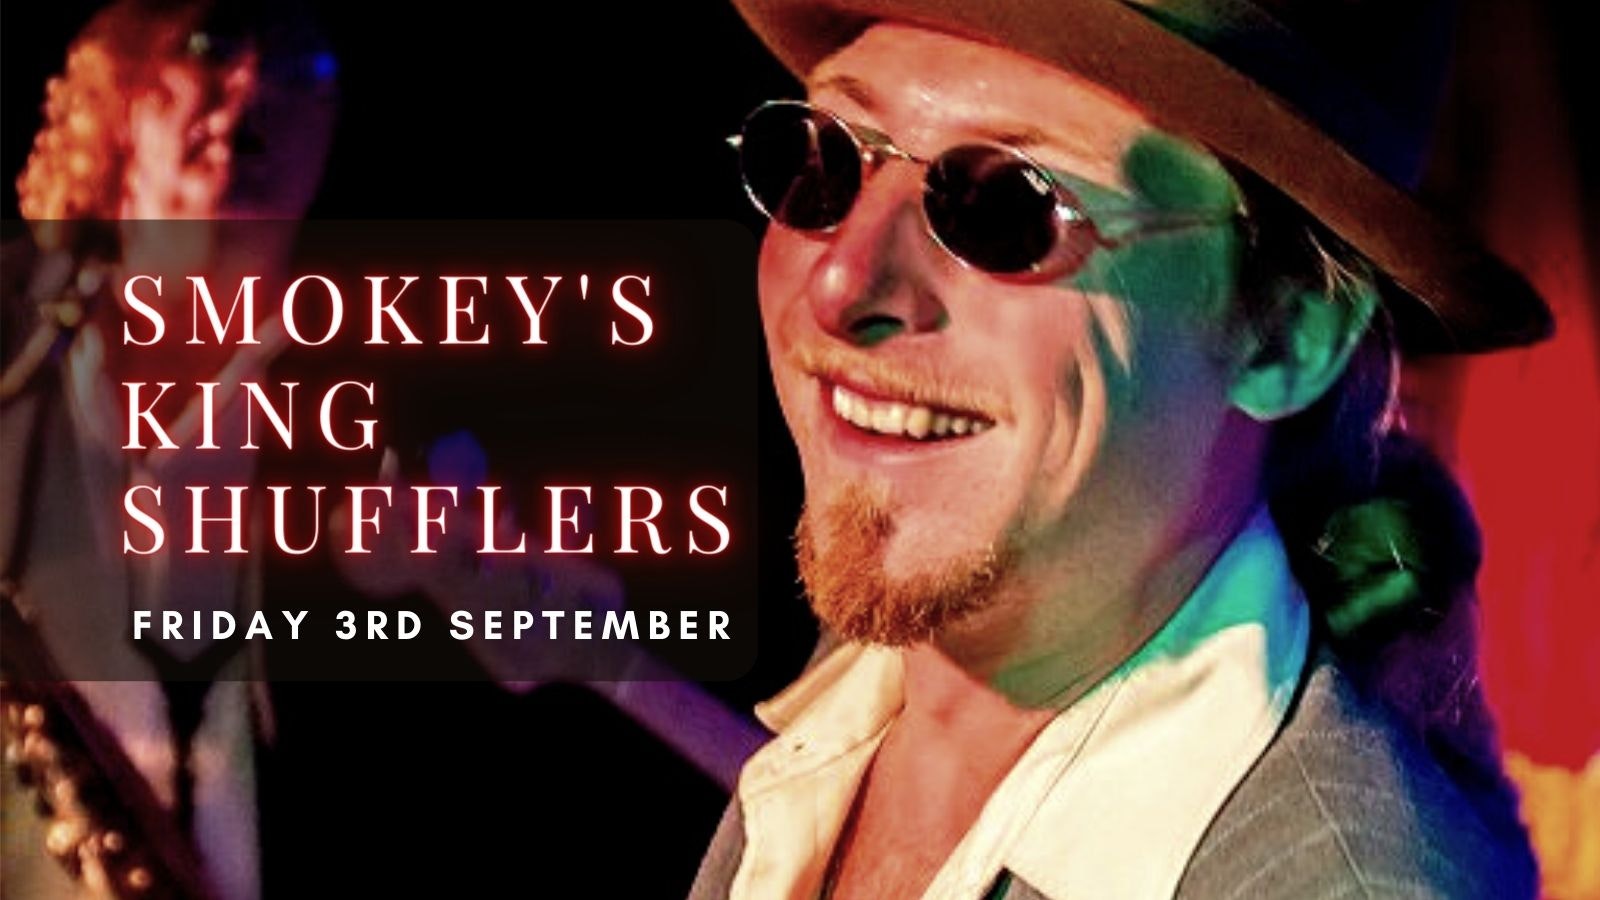 SMOKEY’S KING SHUFFLERS | Plymouth, Annabel’s Cabaret & Discotheque